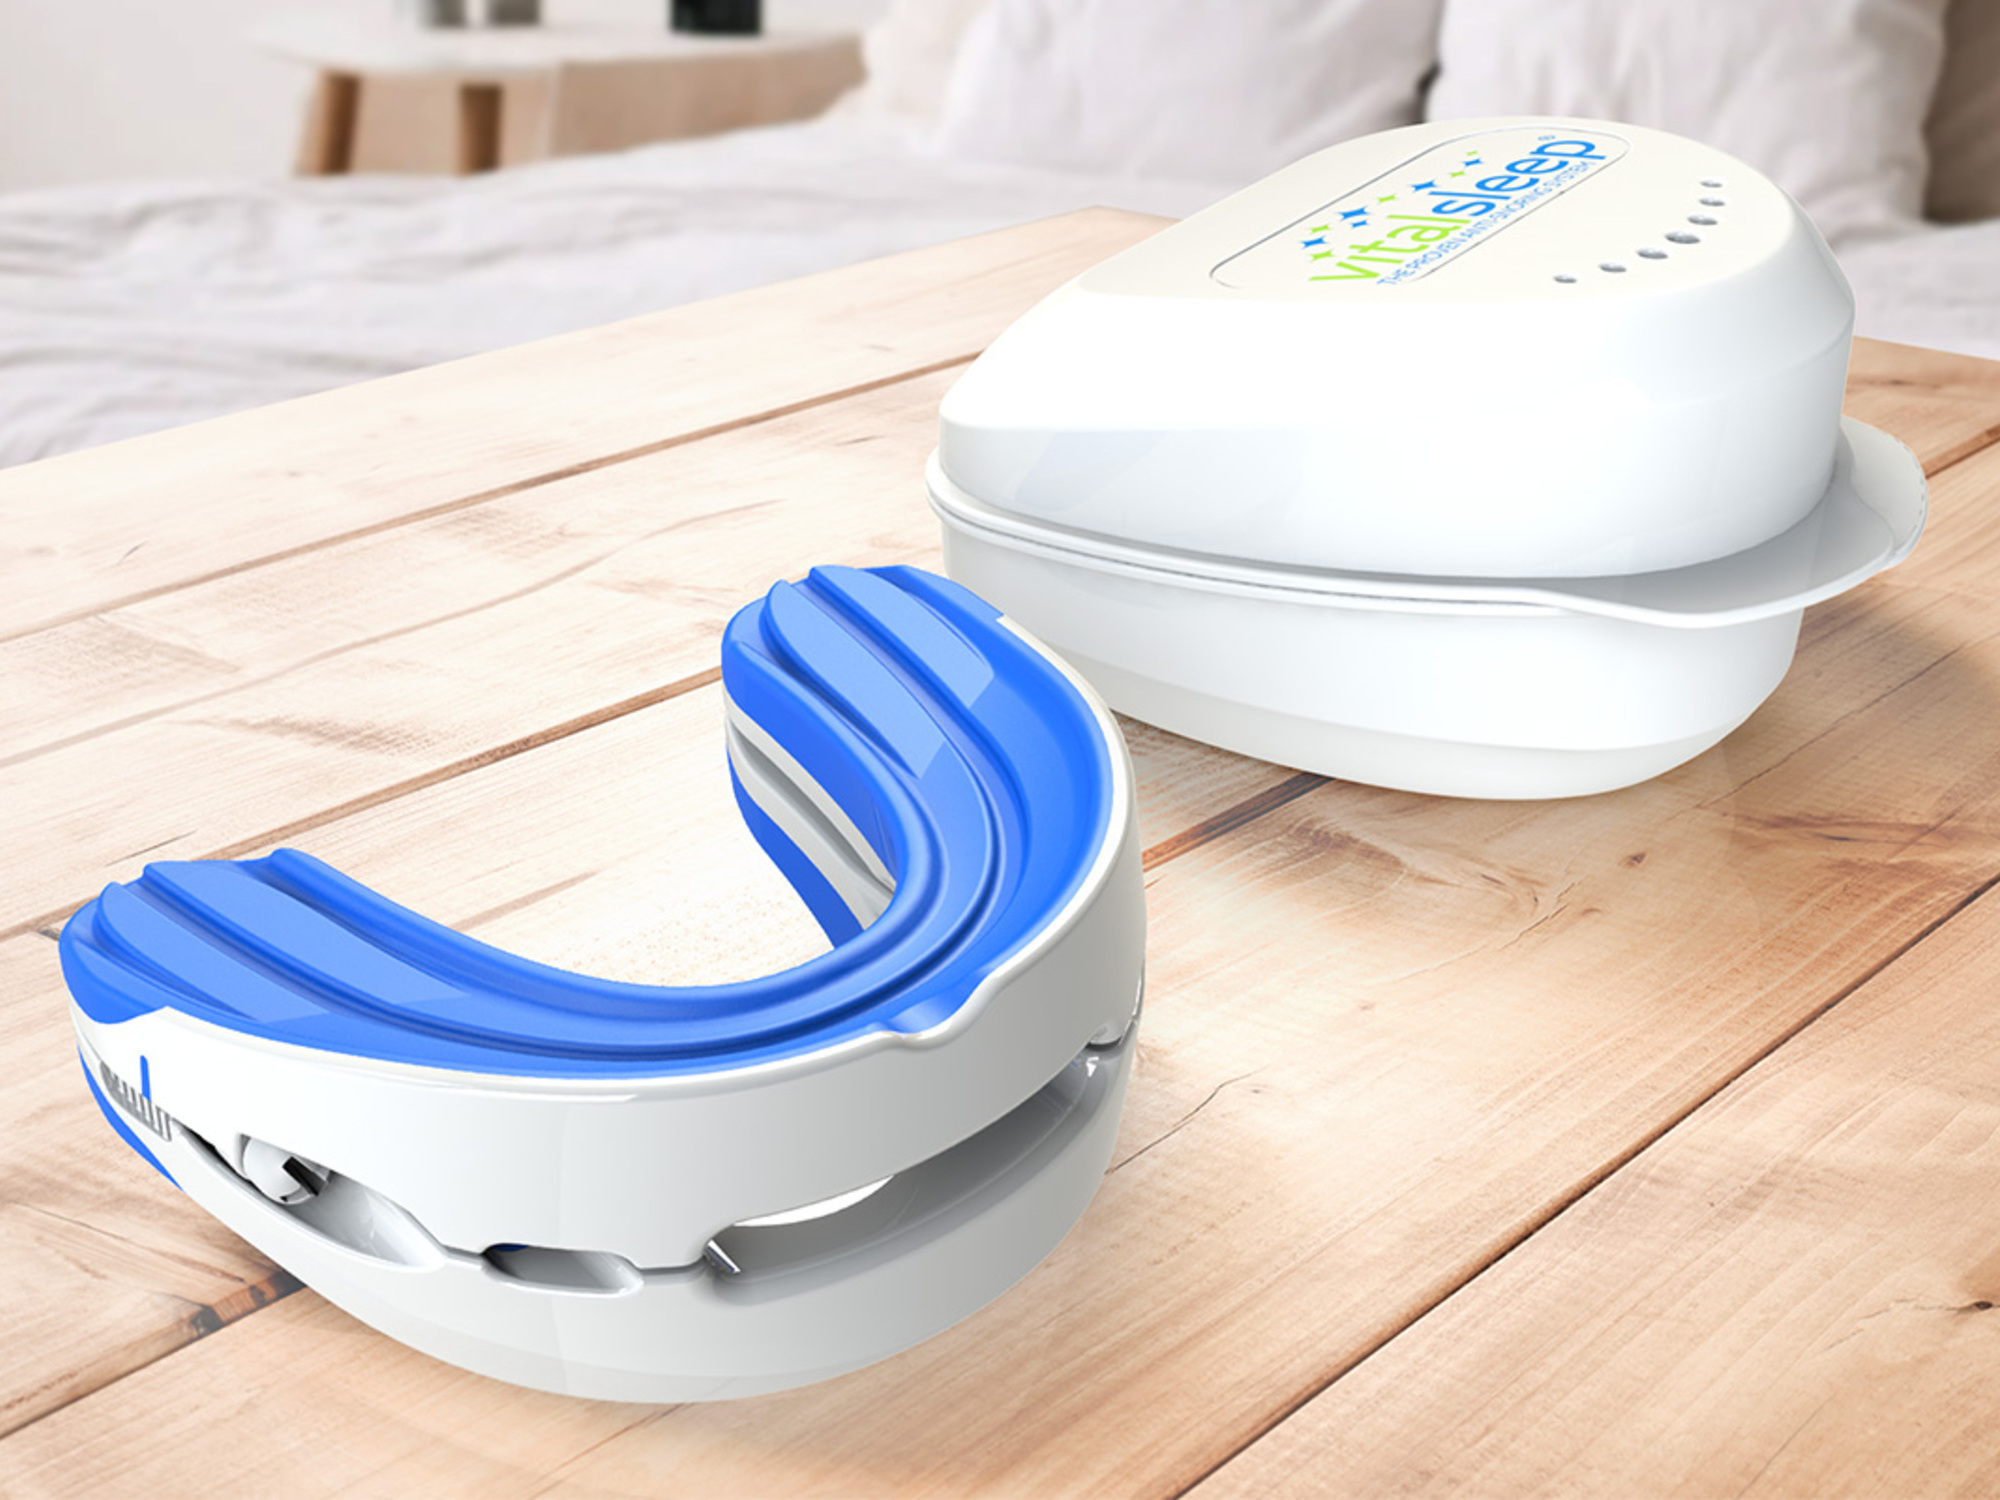 Snoring getting you down? Here’s a device that can help